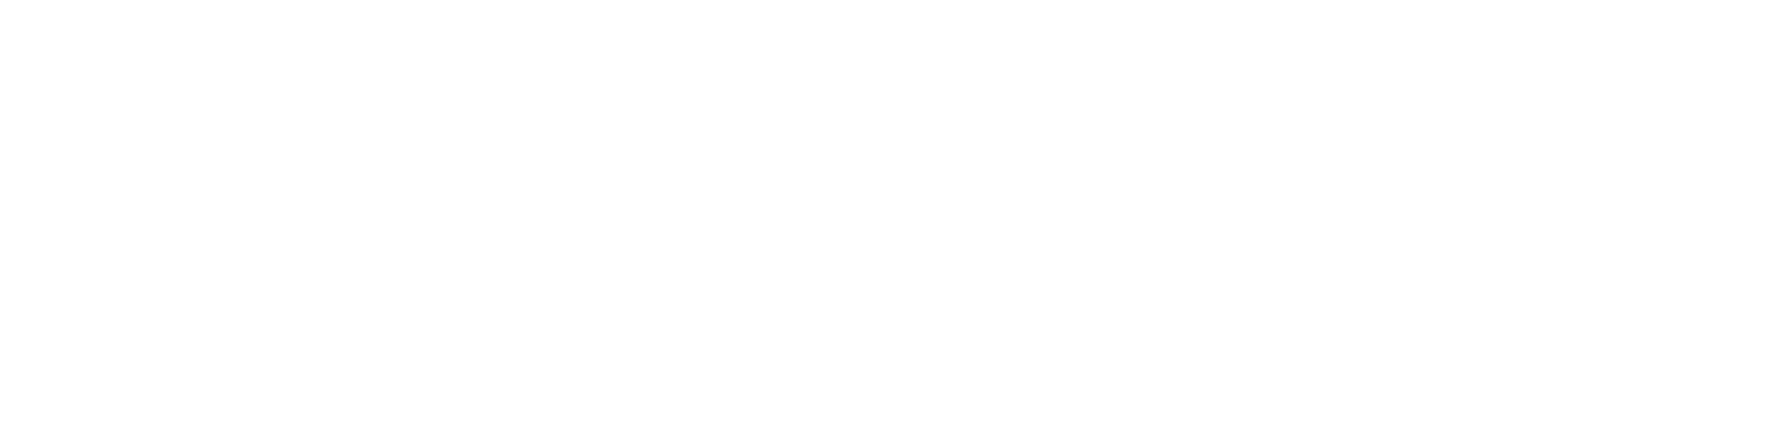 The Green Party logo